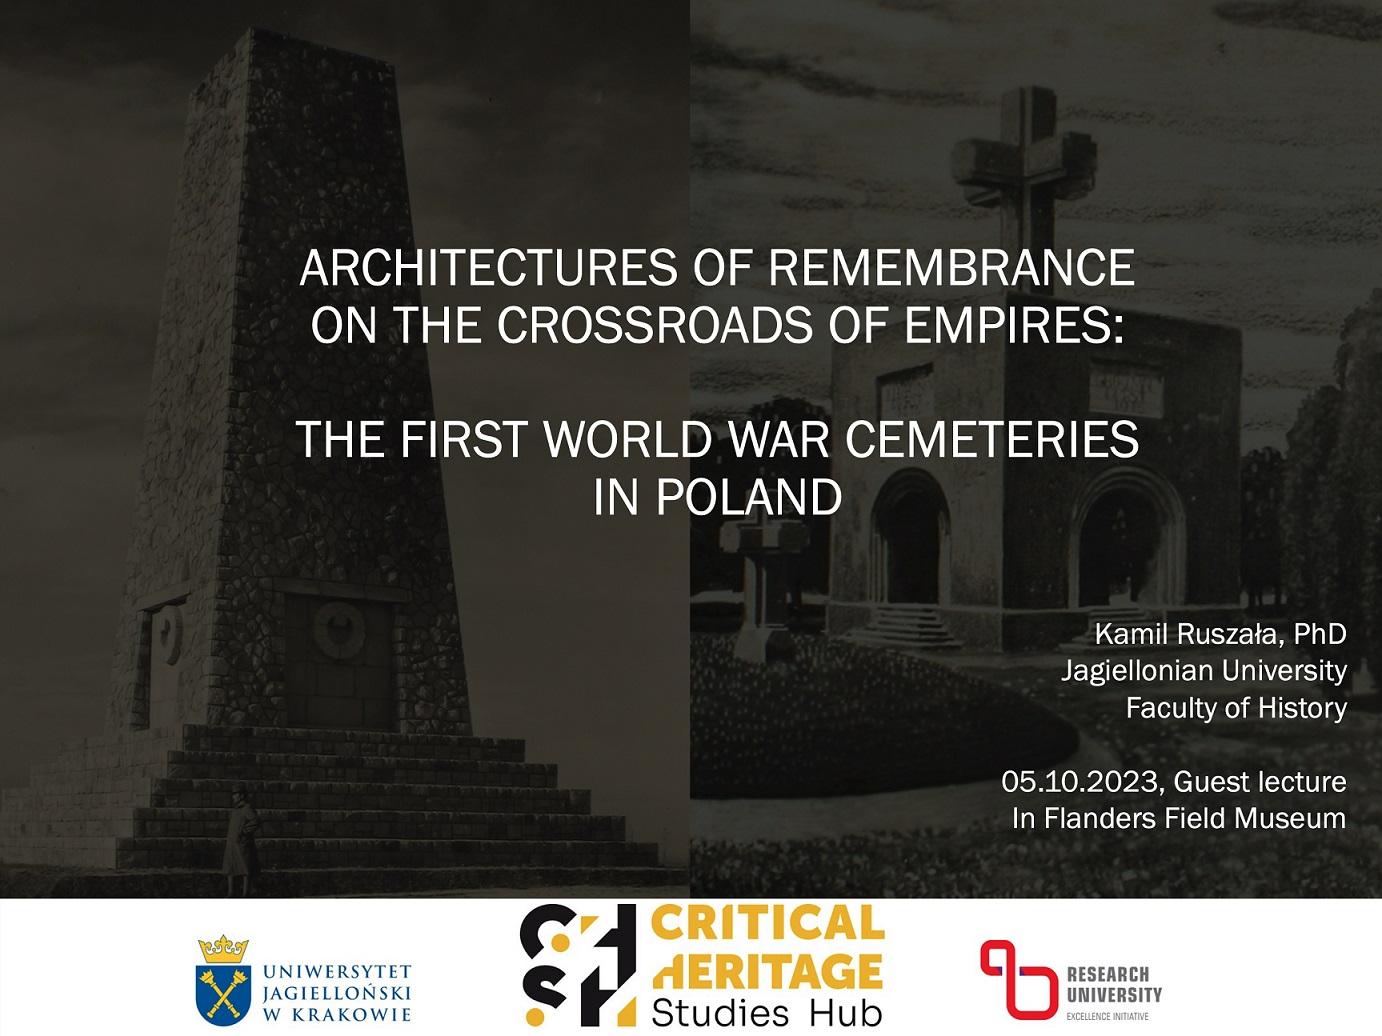 Poster for the event: a lecture by Dr. Kamil Ruszała, entitled "Architectures of Remembrance on the Crossroads of Empires"